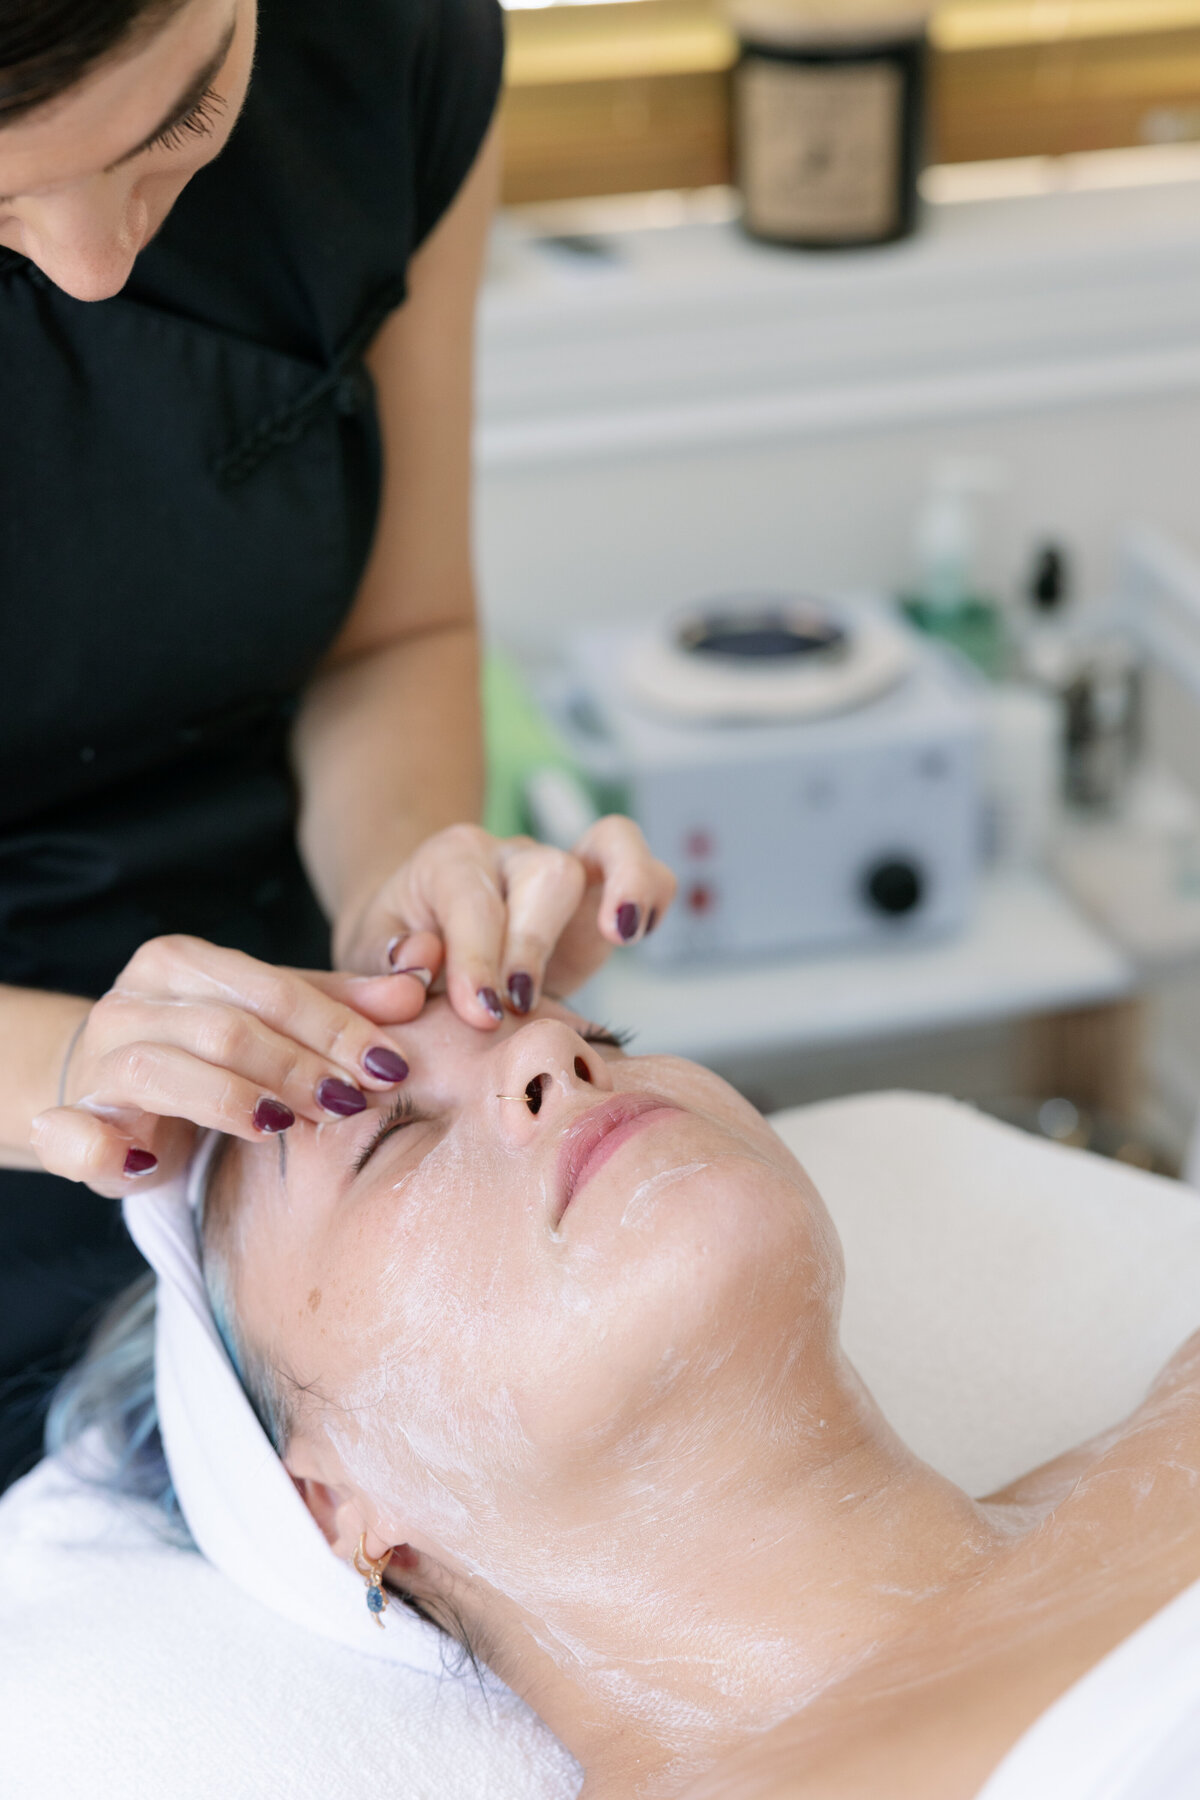 Get all of your beauty services in one place with Makeup N Giggles in Key West. From makeup and hair to skincare and spa treatments, we have everything you need to look and feel your best.